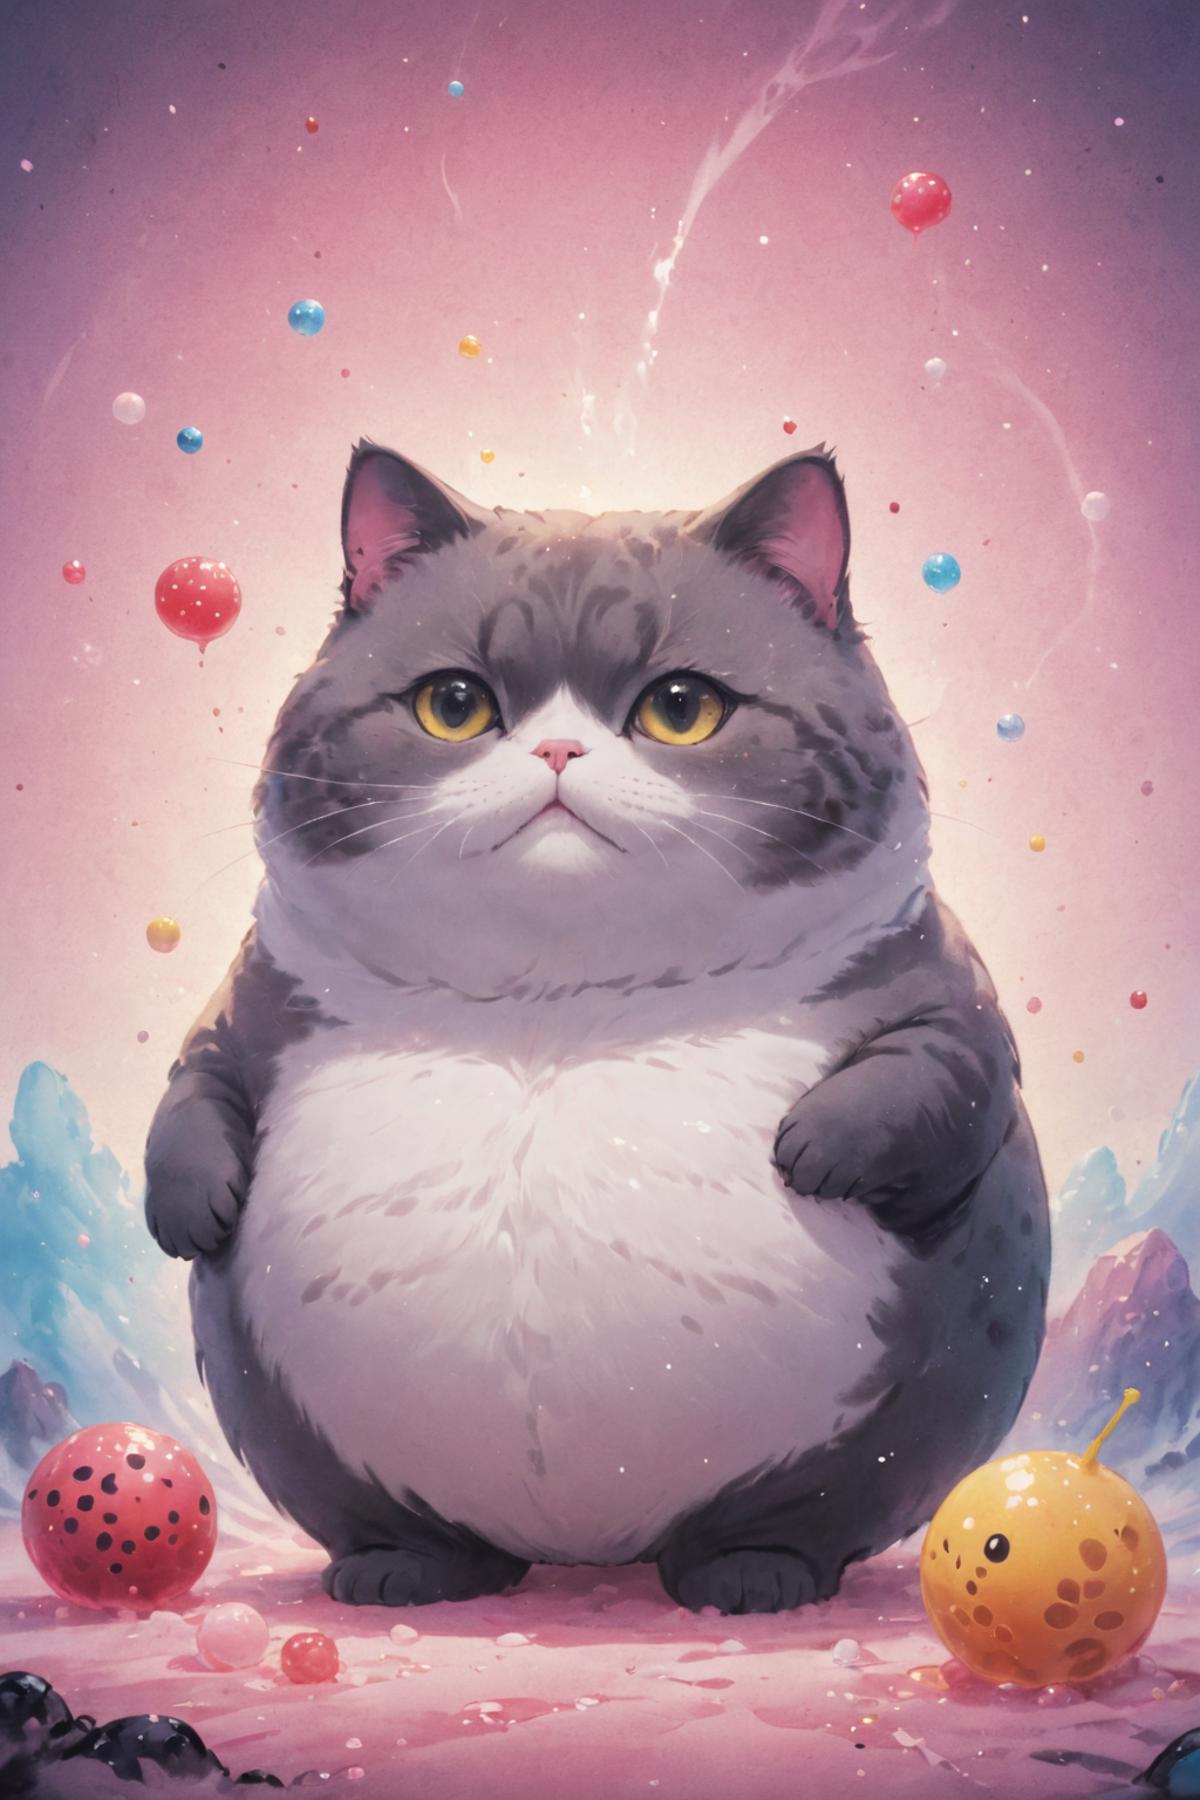 Fat Cat with Yellow Eyes Sitting on a Cloudy Background with Easter Eggs in the Sky